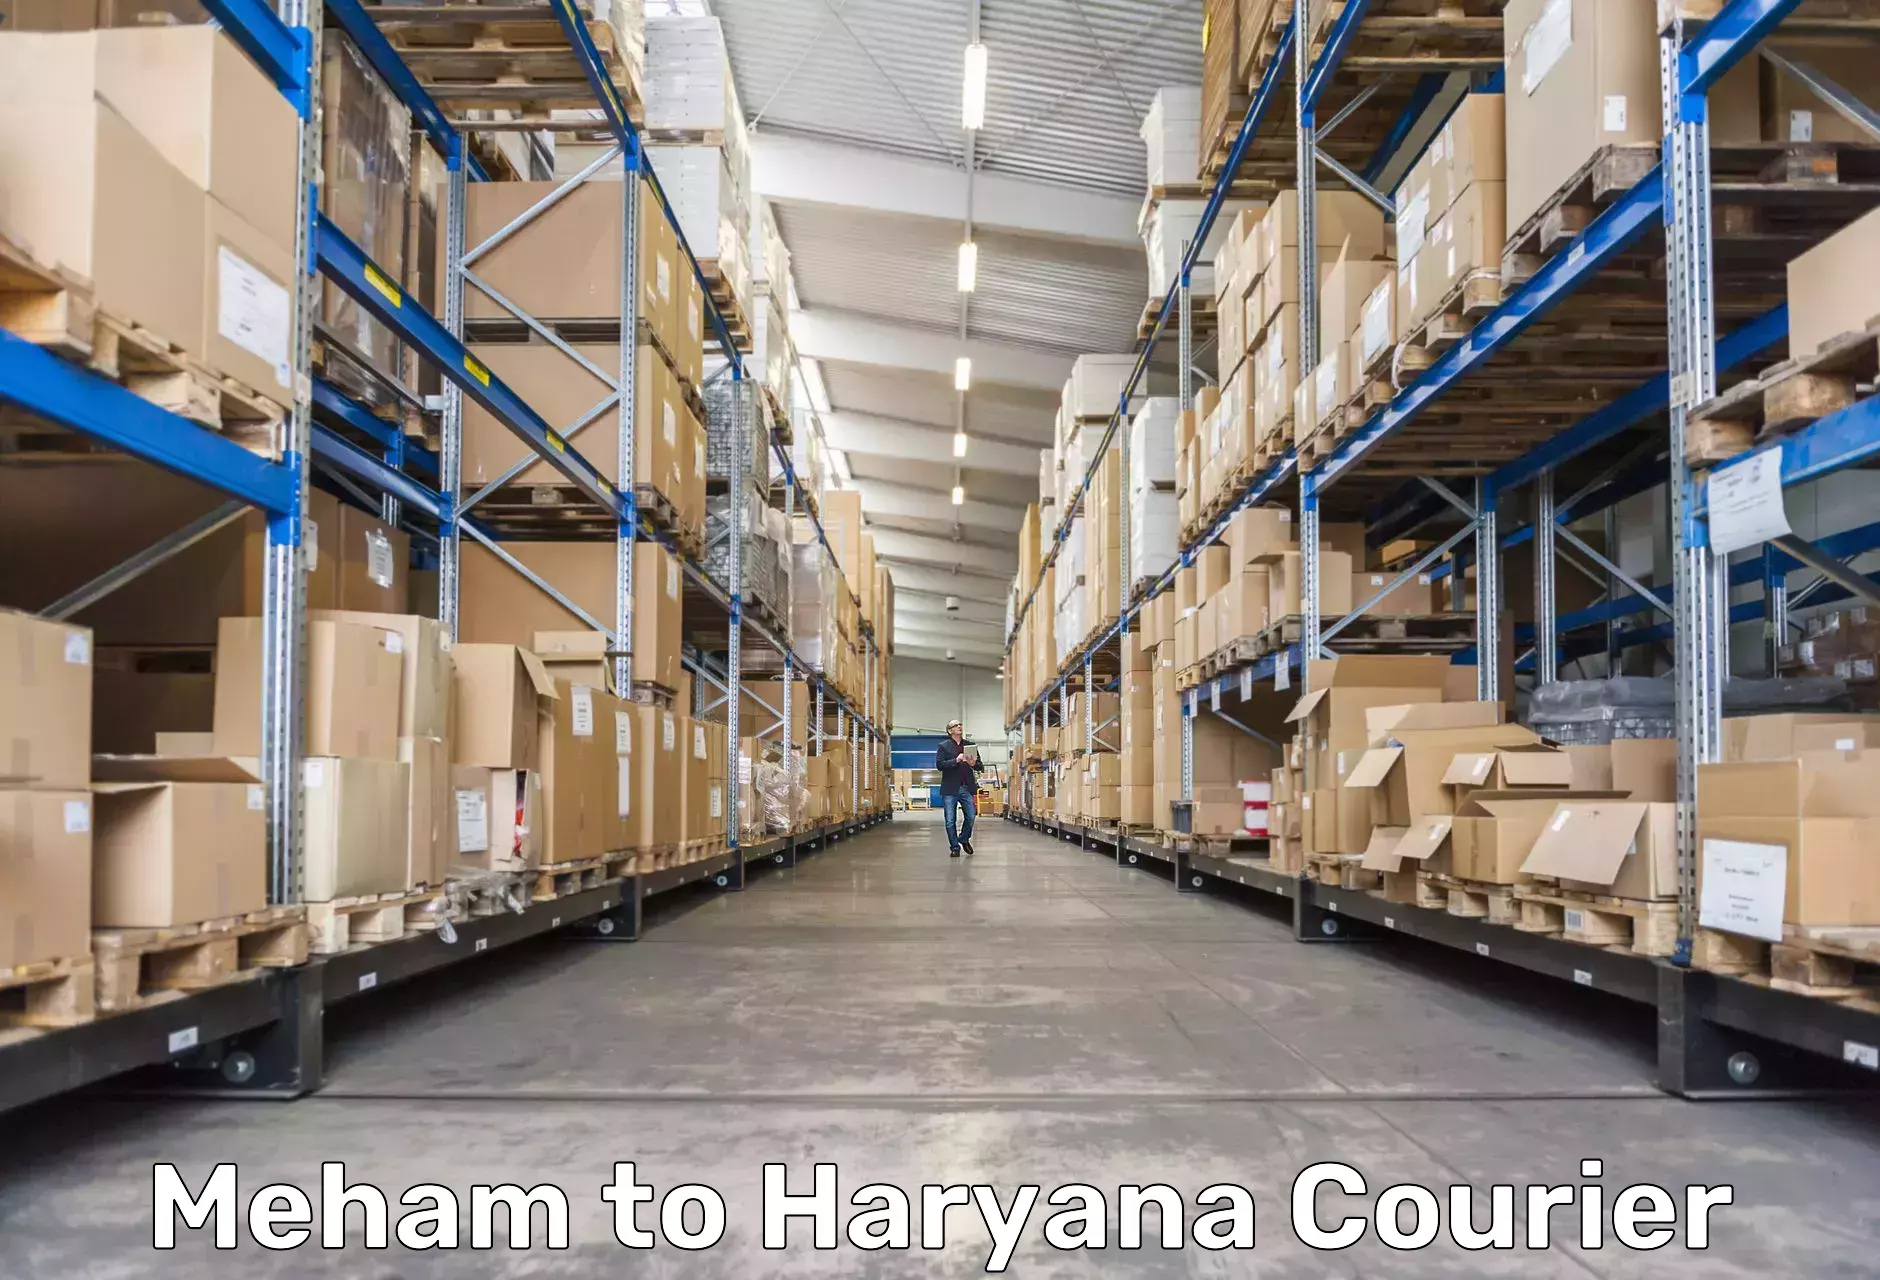 Global freight services Meham to Chirya